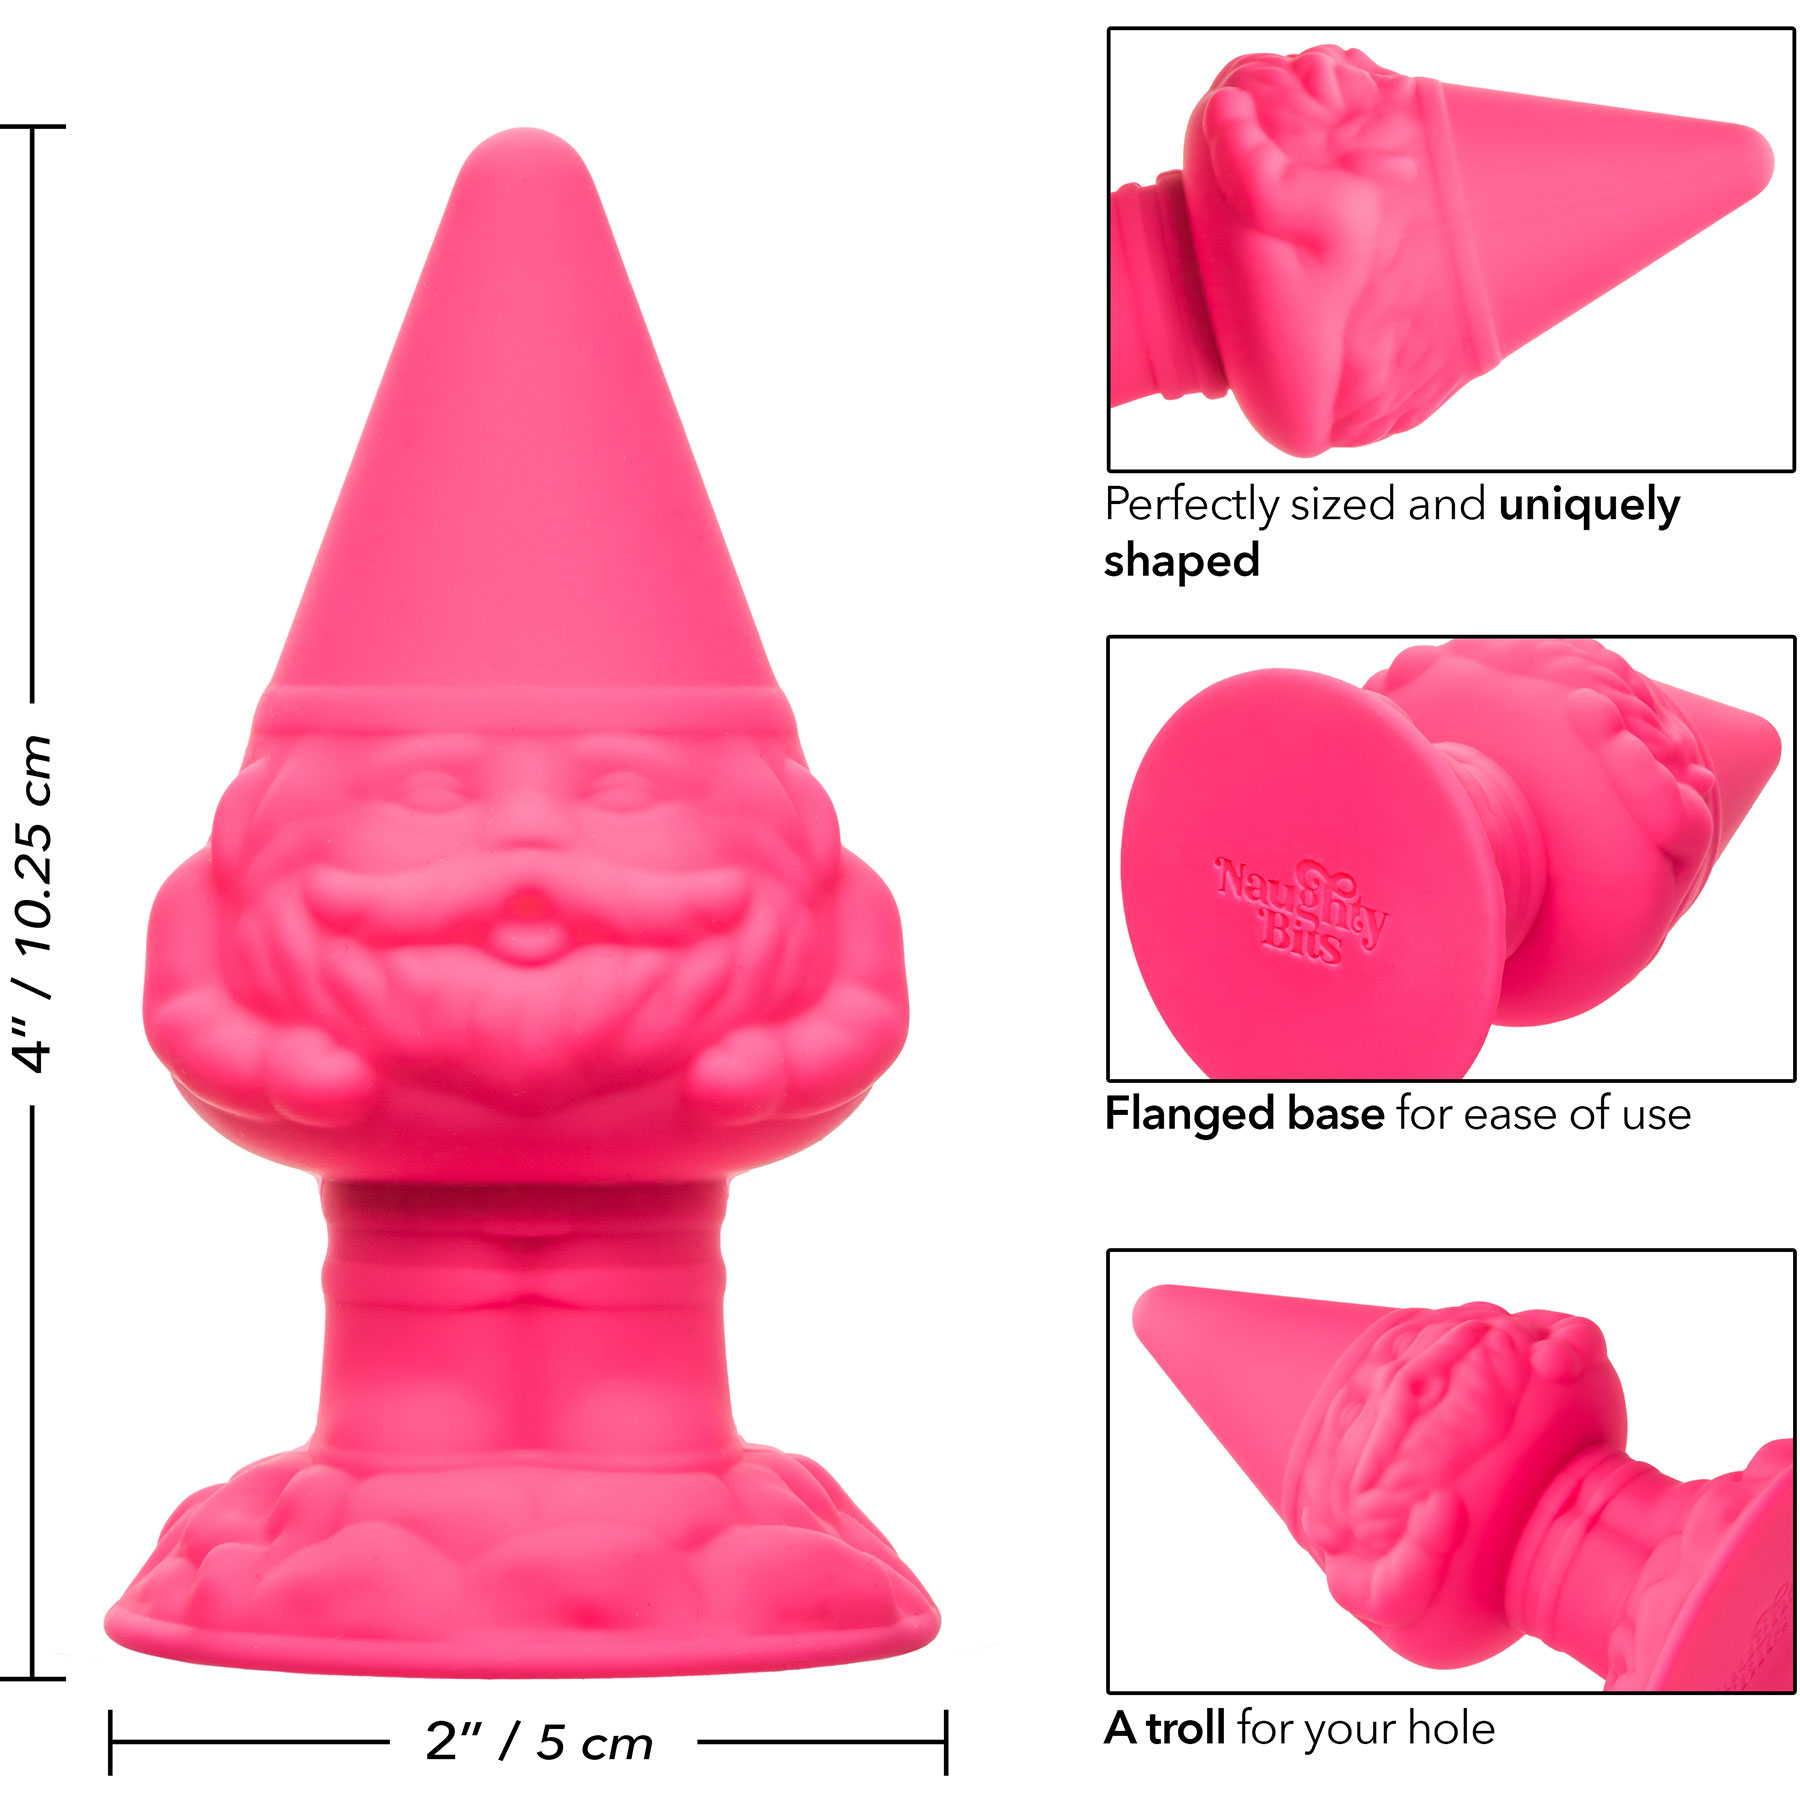 Naughty Bits Anal Gnome Silicone Butt Plug By CalExotics - Measurements